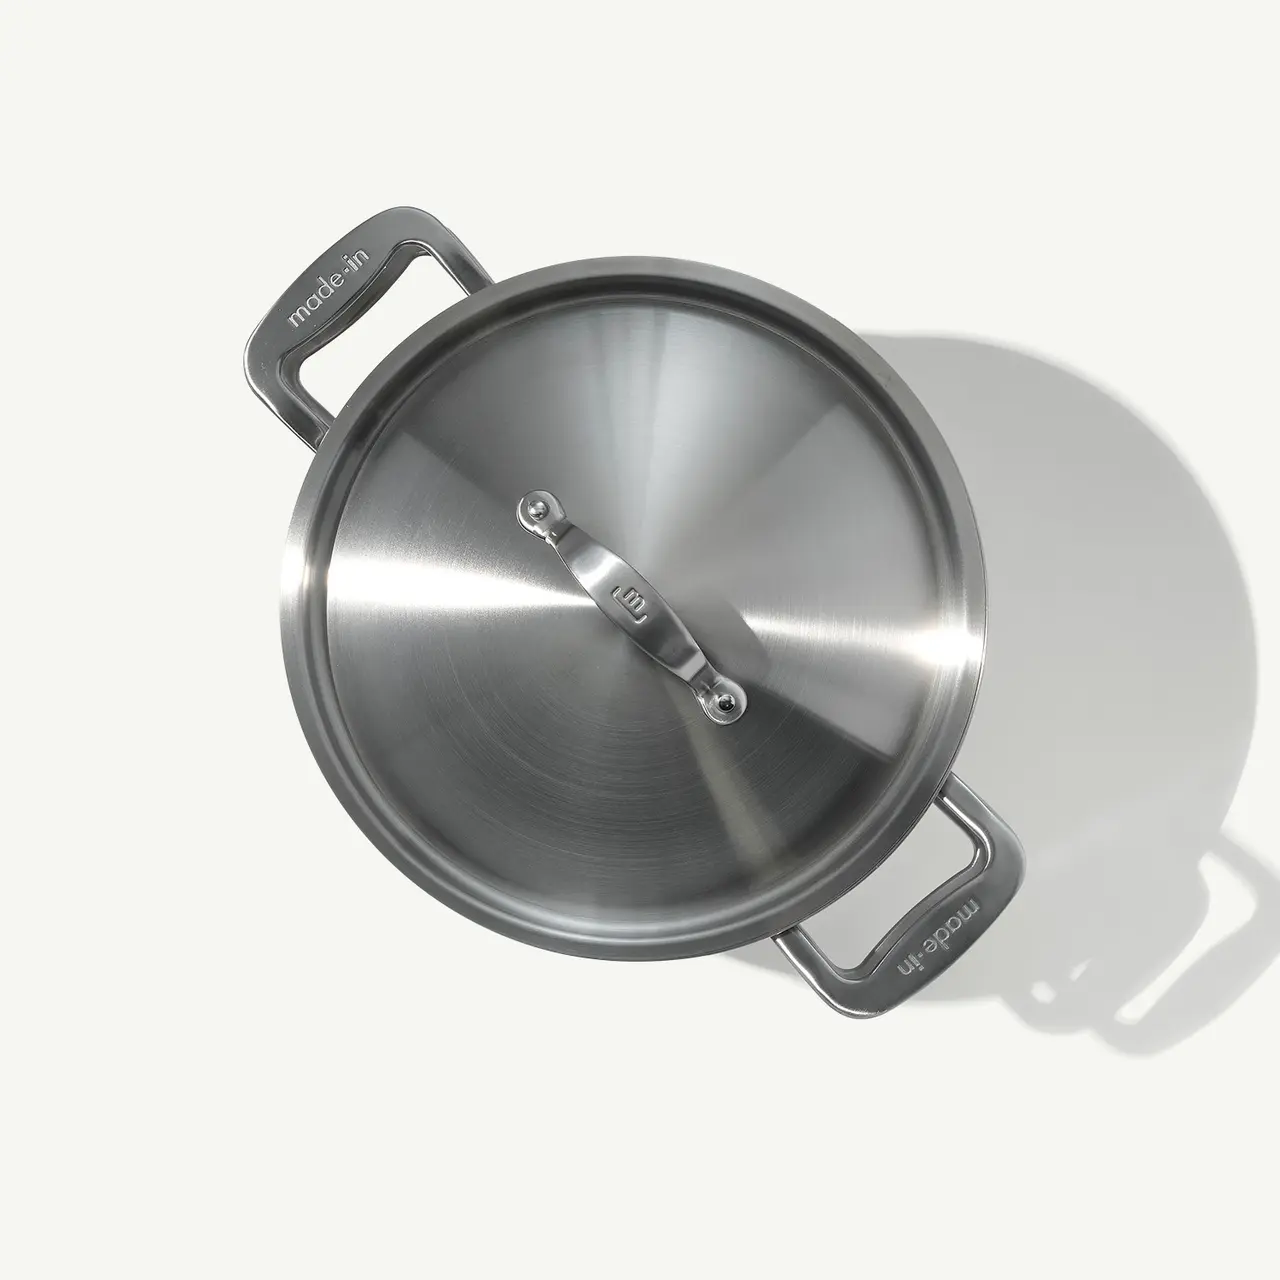 A stainless steel cooking pot with two handles sits on a light surface, casting a soft shadow.